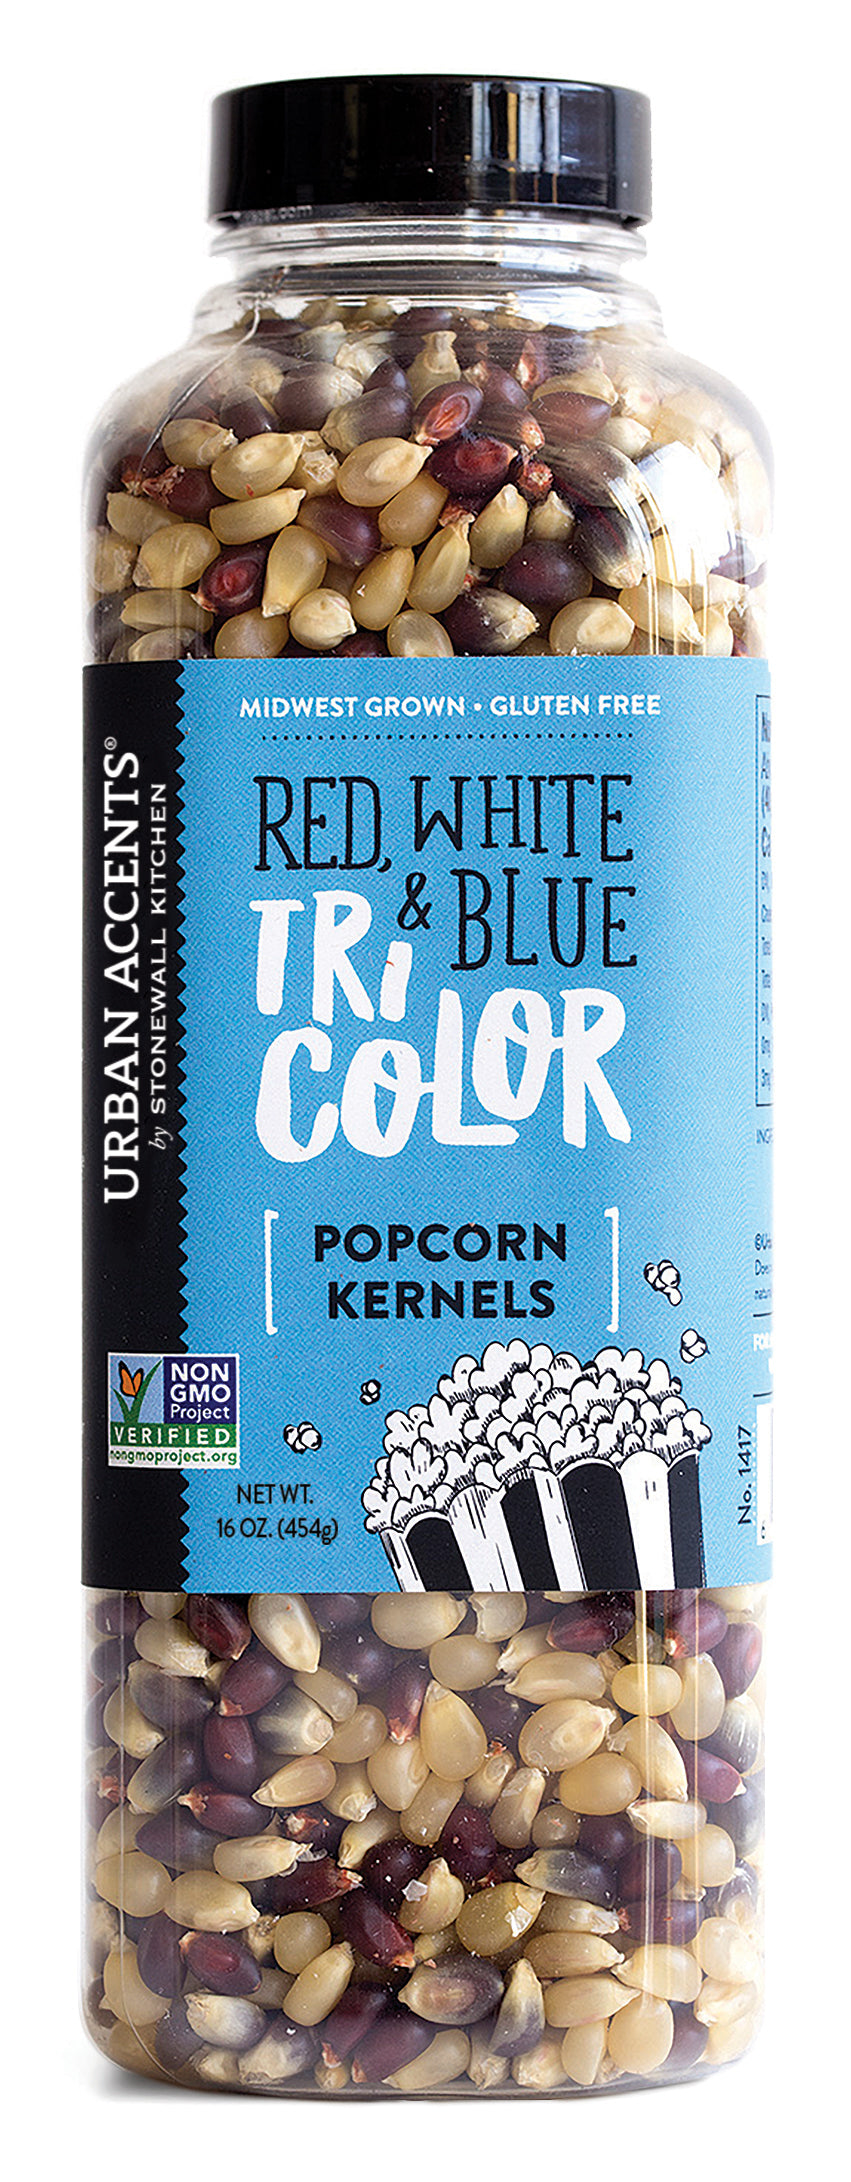 Urban Accents by Stonewall Kitchen Popcorn Kernels - Olive Oil Etcetera 